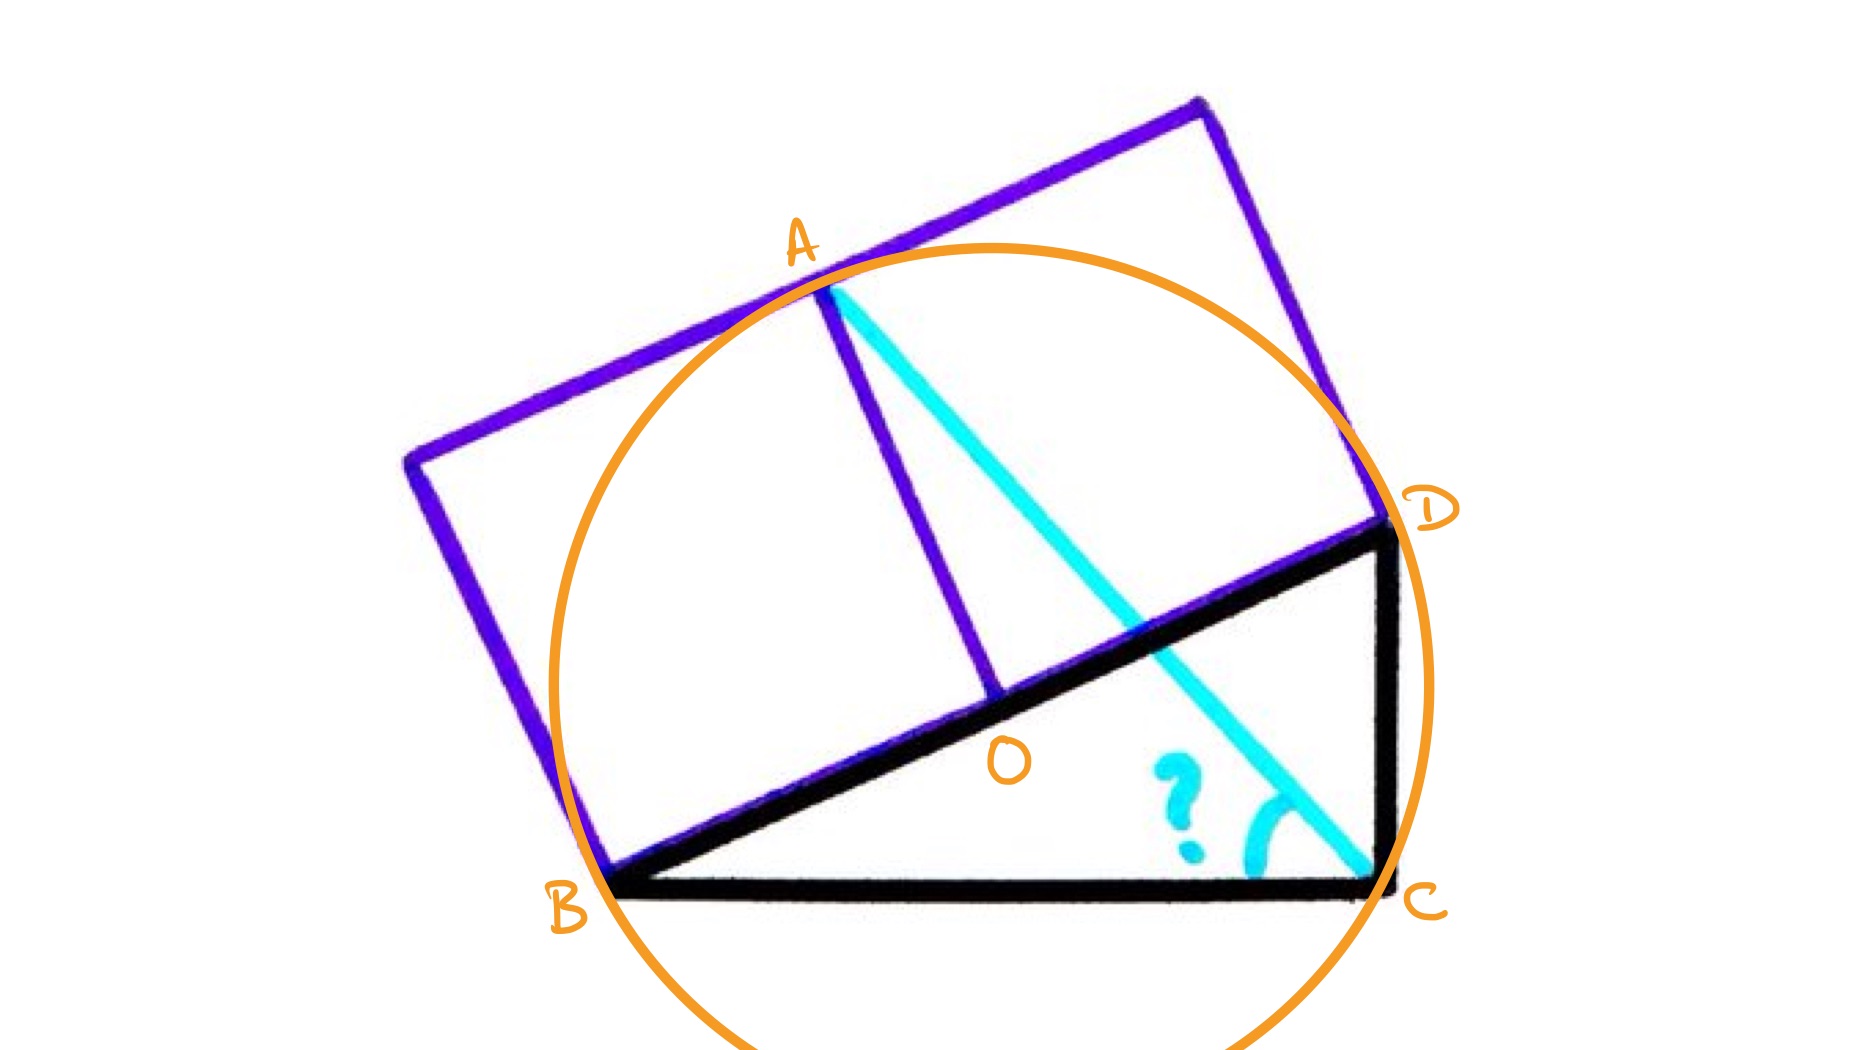 Two squares on a triangle labelled